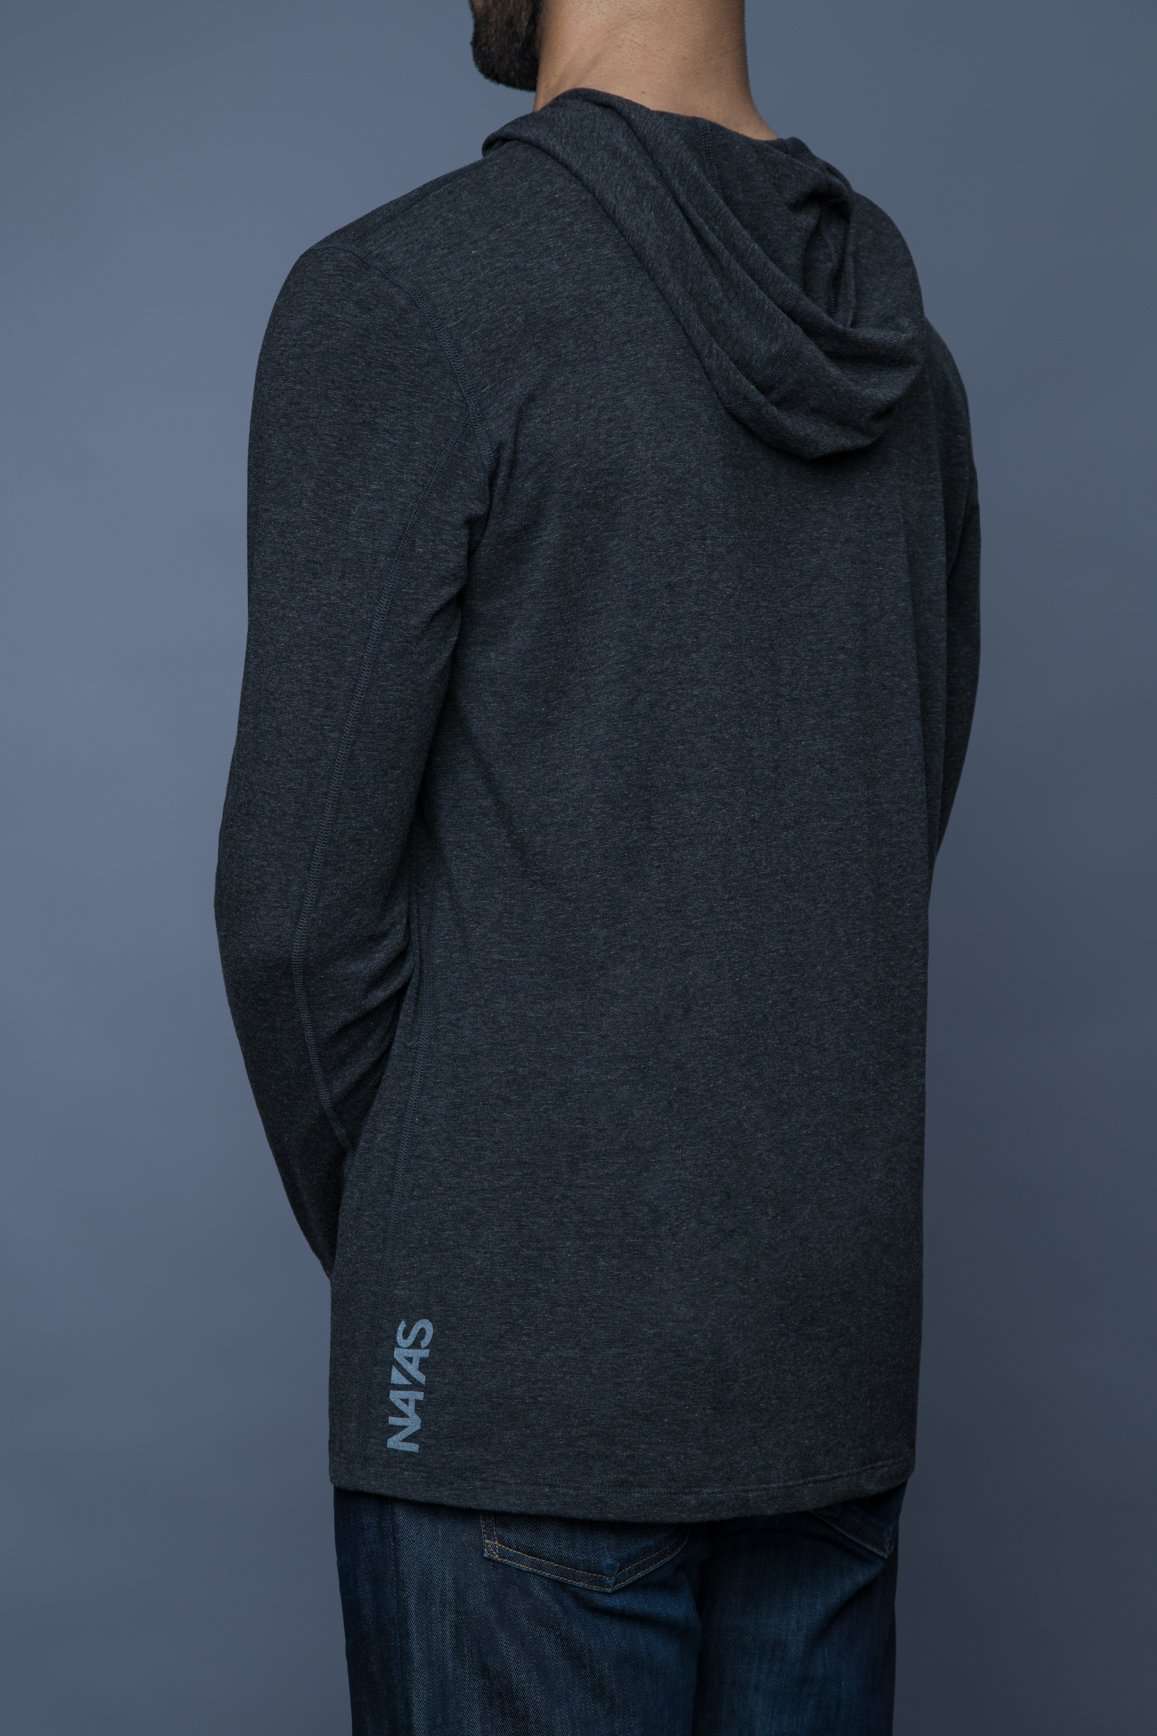 The Navas Lab Vasquez Microstripe long-sleeve hooded shirt for tall guys in Charcoal mix. The perfect tall slim shirt for tall and slim guys looking for style and comfort.